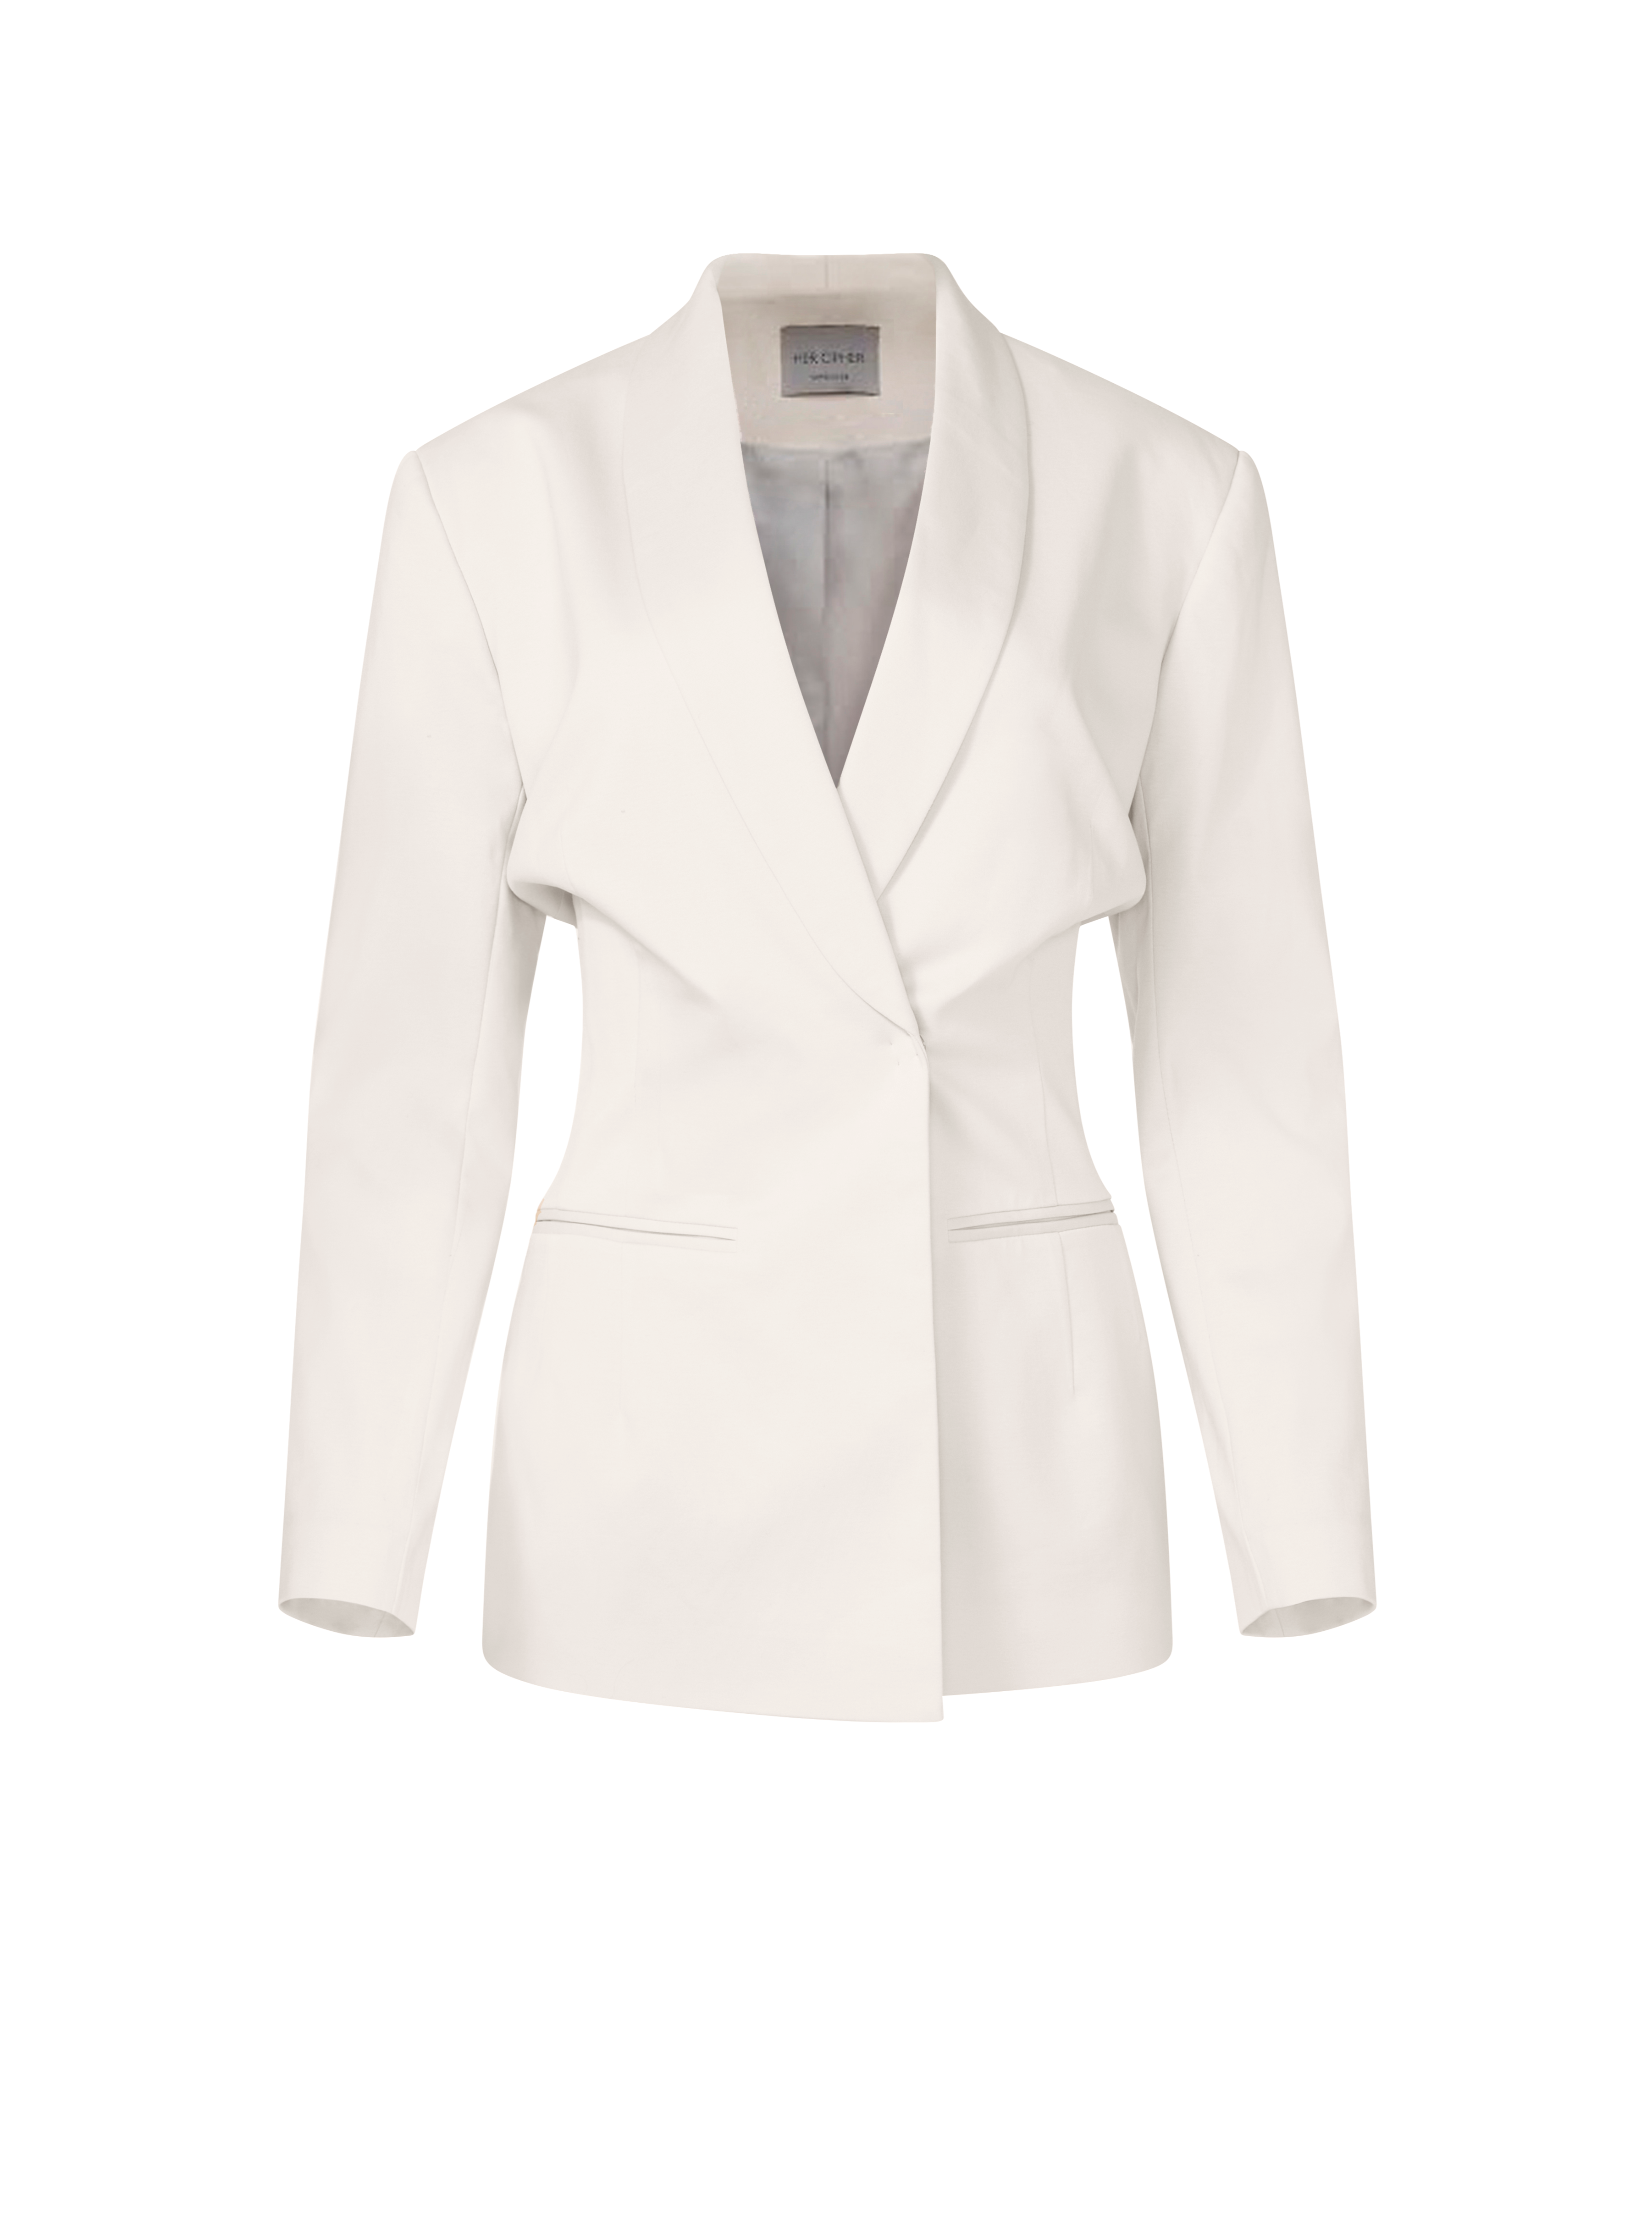 An organic cotton blazer with hourglass shape in light cream color